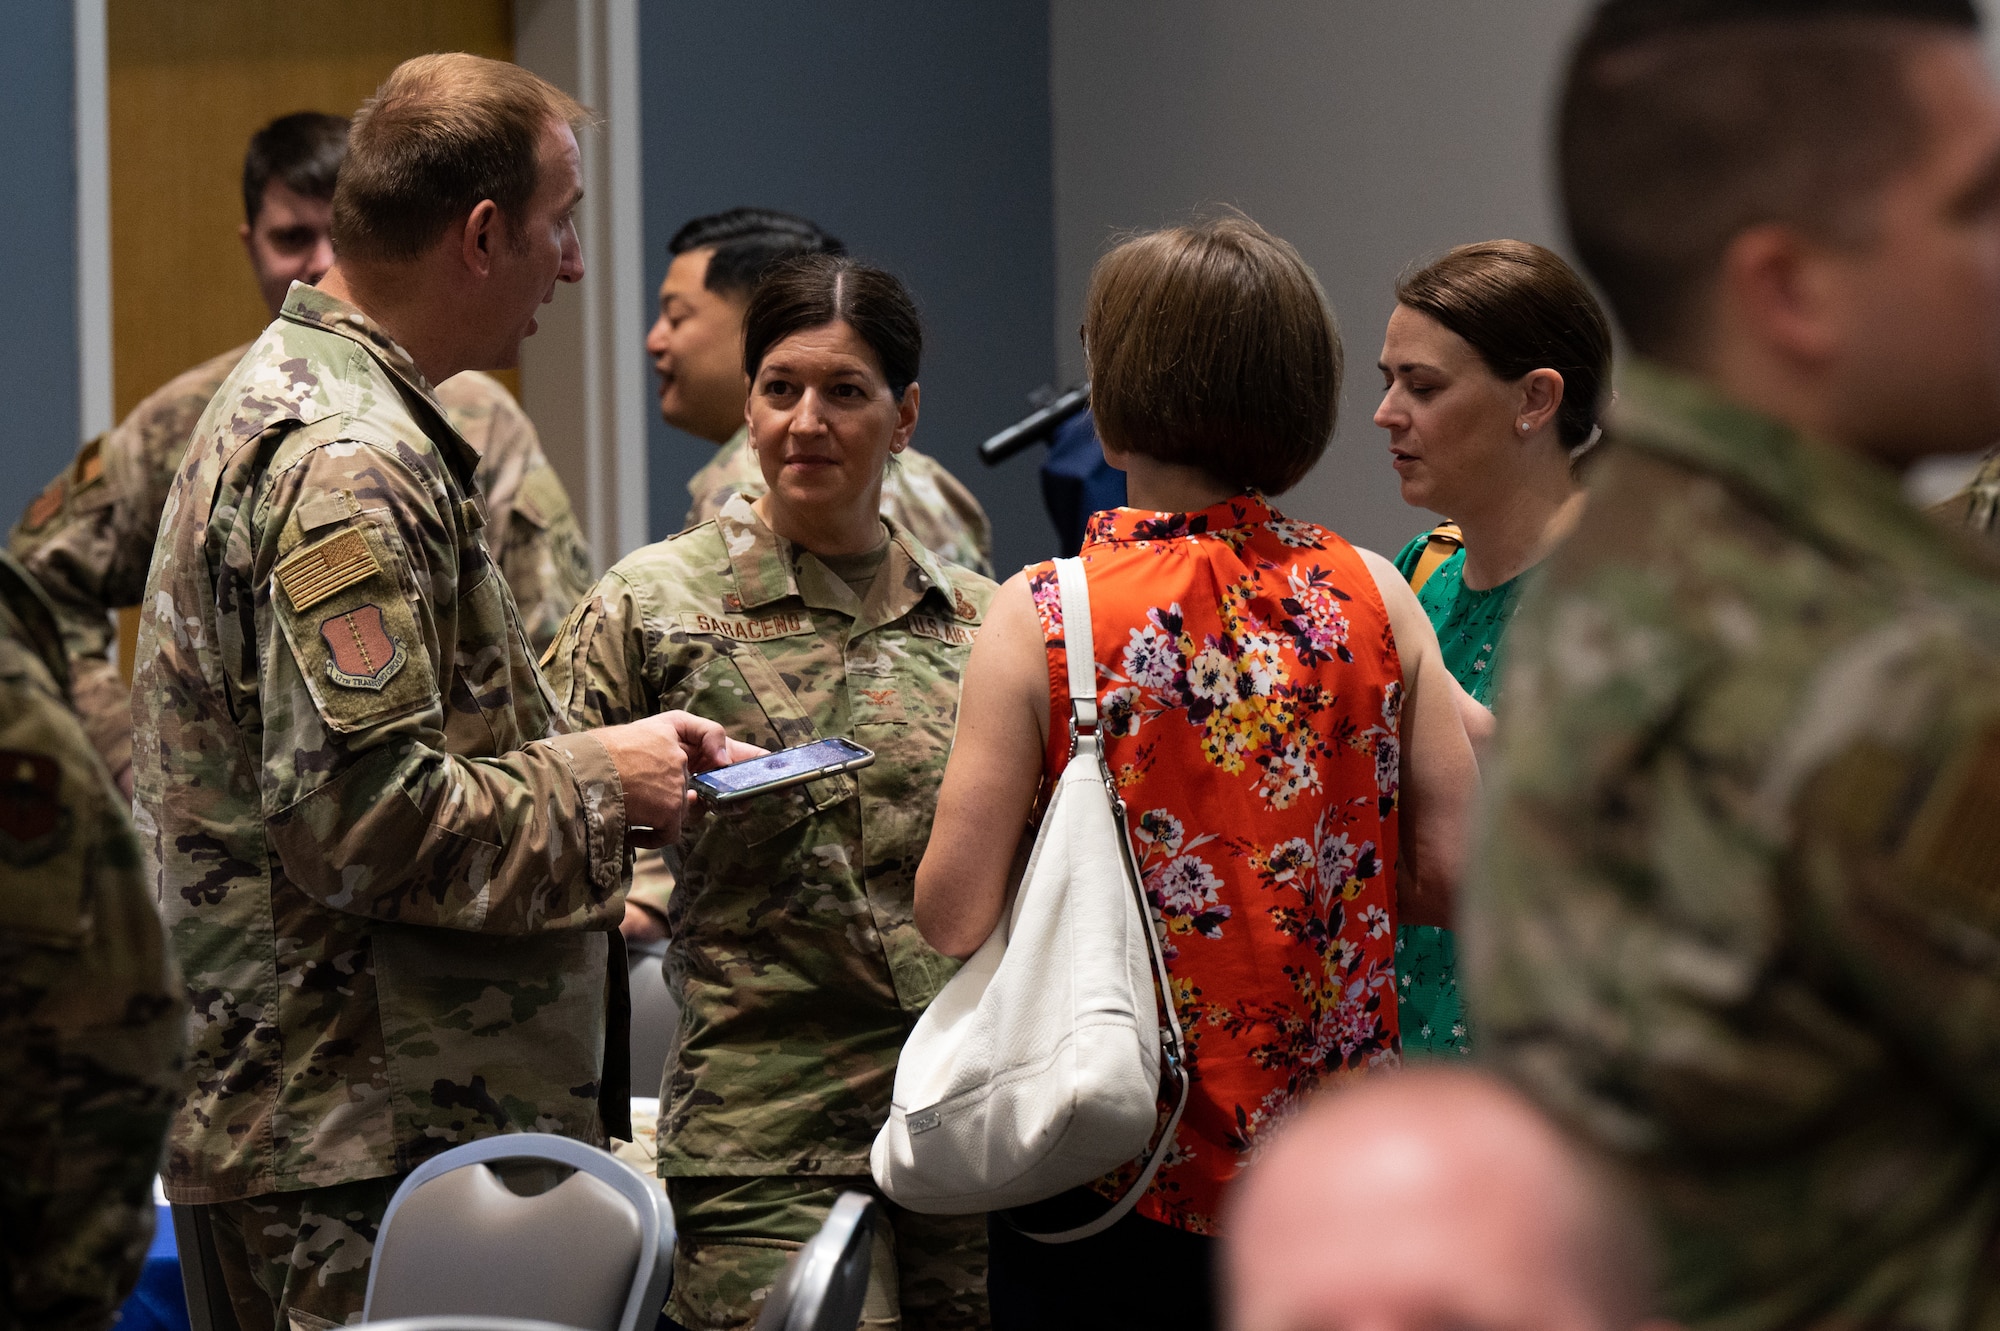 U.S. Air Force Col. Jason Kulcher, 17th Training Wing commander, speaks with Col. Jennifer Saraceno, 517th Training Group commander, and 17th Training Wing key spouses during the Senior Leadership Summit at the Powell Event Center, Goodfellow Air Force Base, Texas, July 27, 2022. The summit gave commanders, senior enlisted leaders, and their spouses an opportunity to meet and immerse themselves in the 17th TRW culture. (U.S. Air Force photo by Senior Airman Michael Bowman)